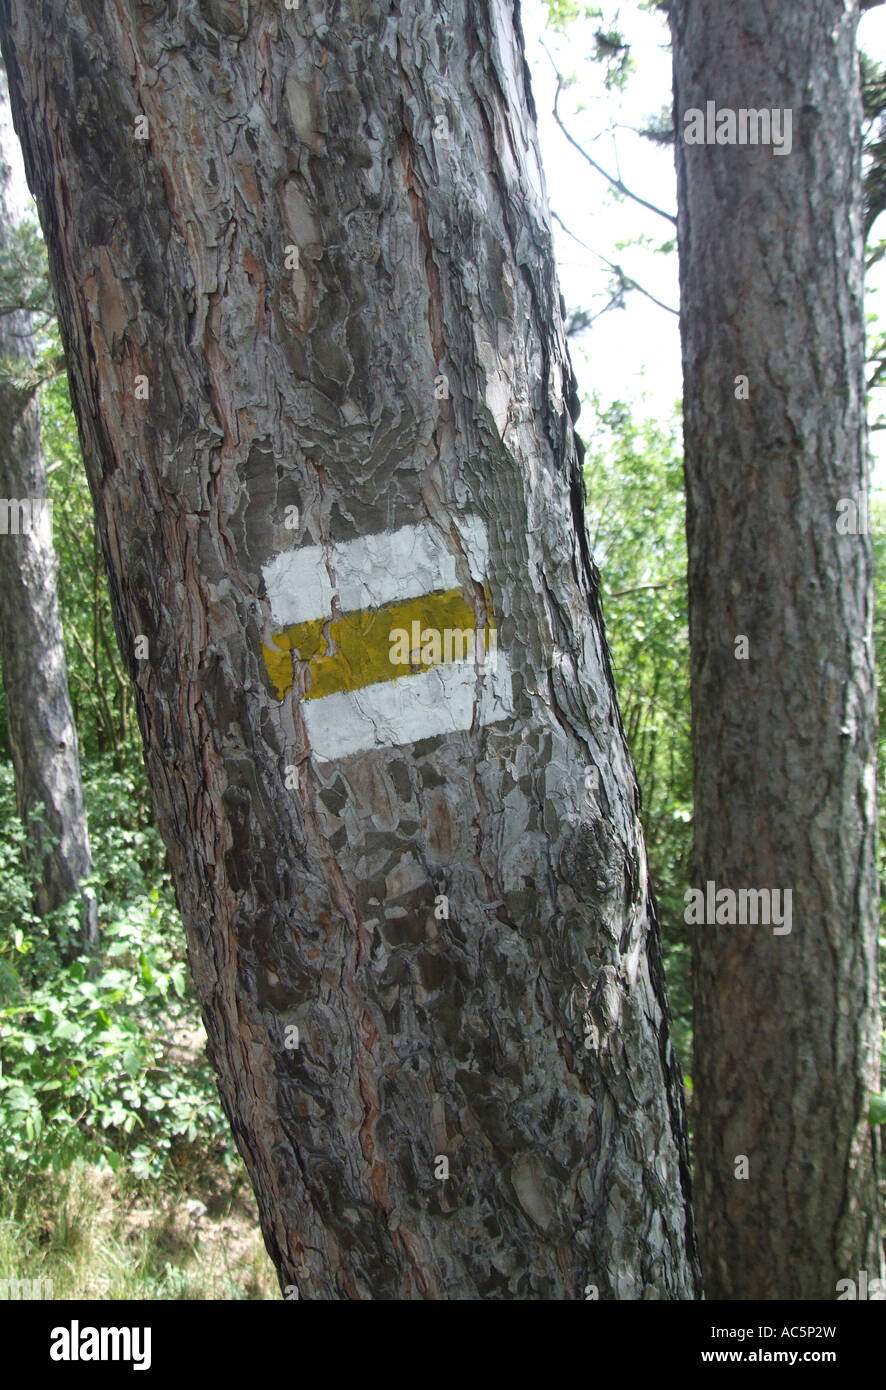 Hiking trail sign Stock Photo